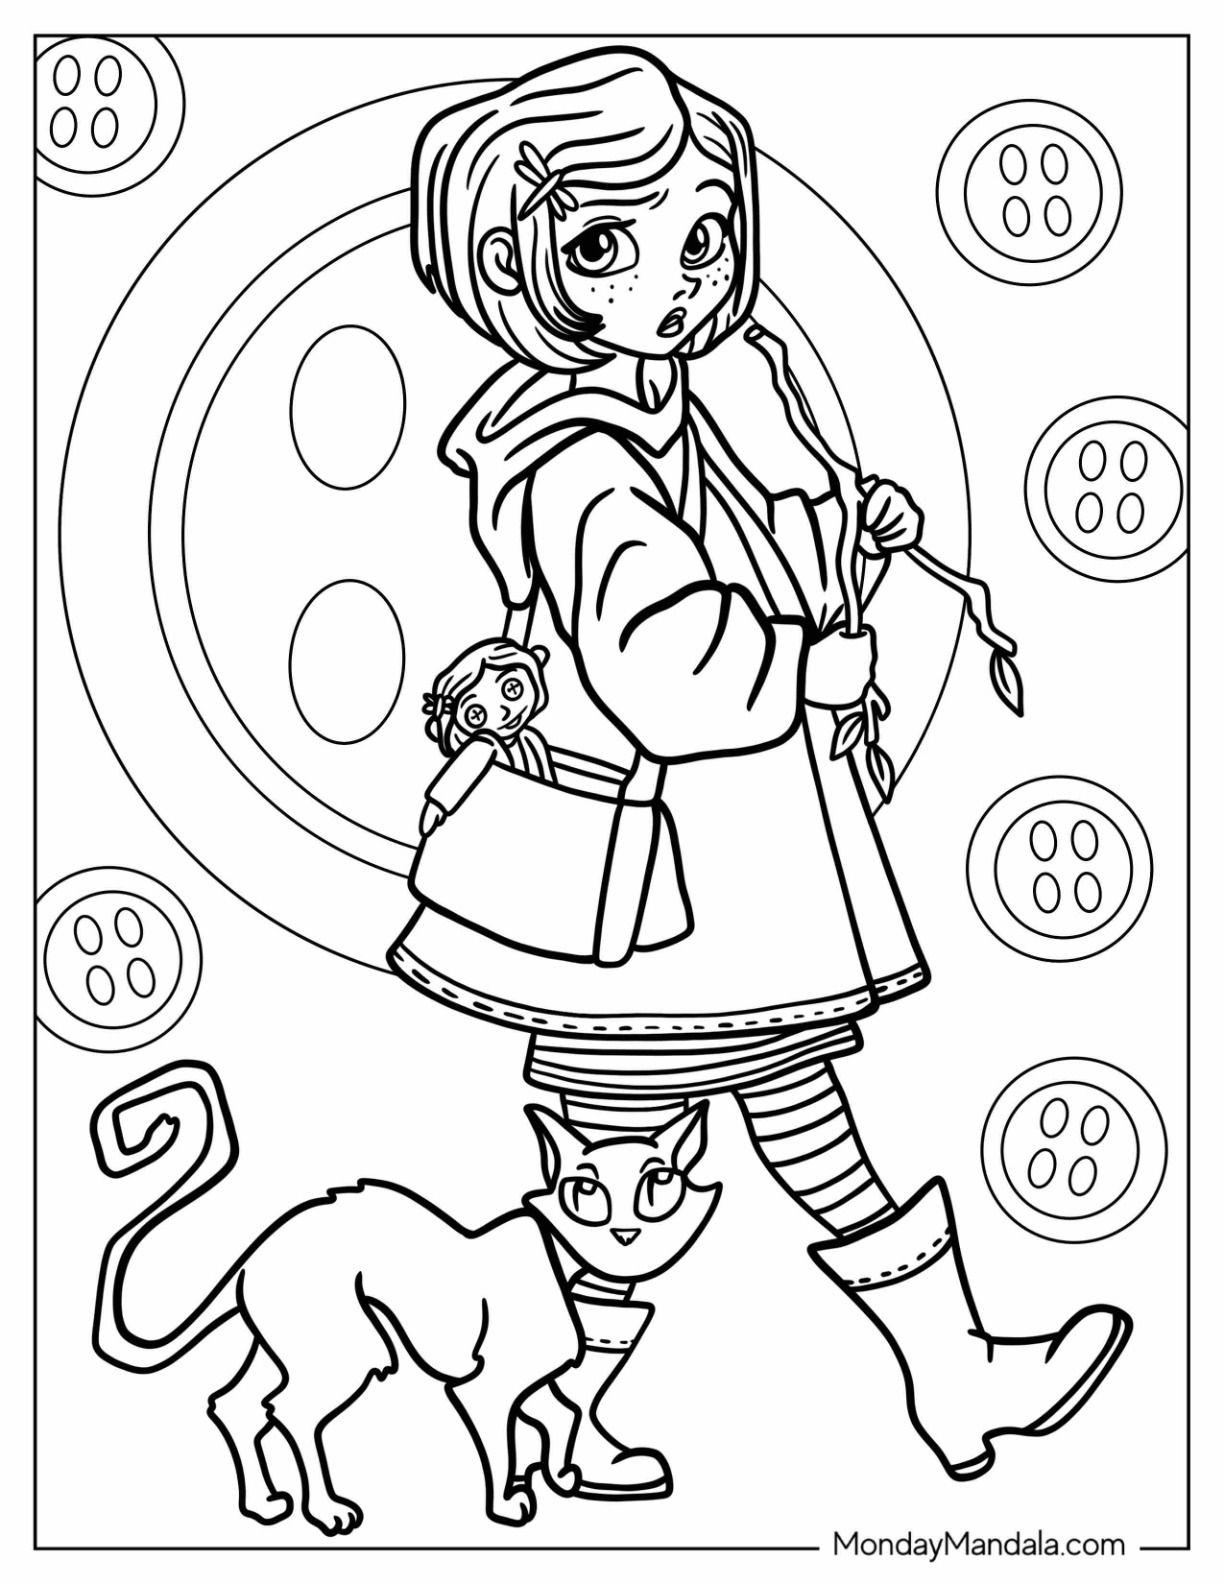 Coraline coloring pages free pdf printables coloring pages coloring books coraline